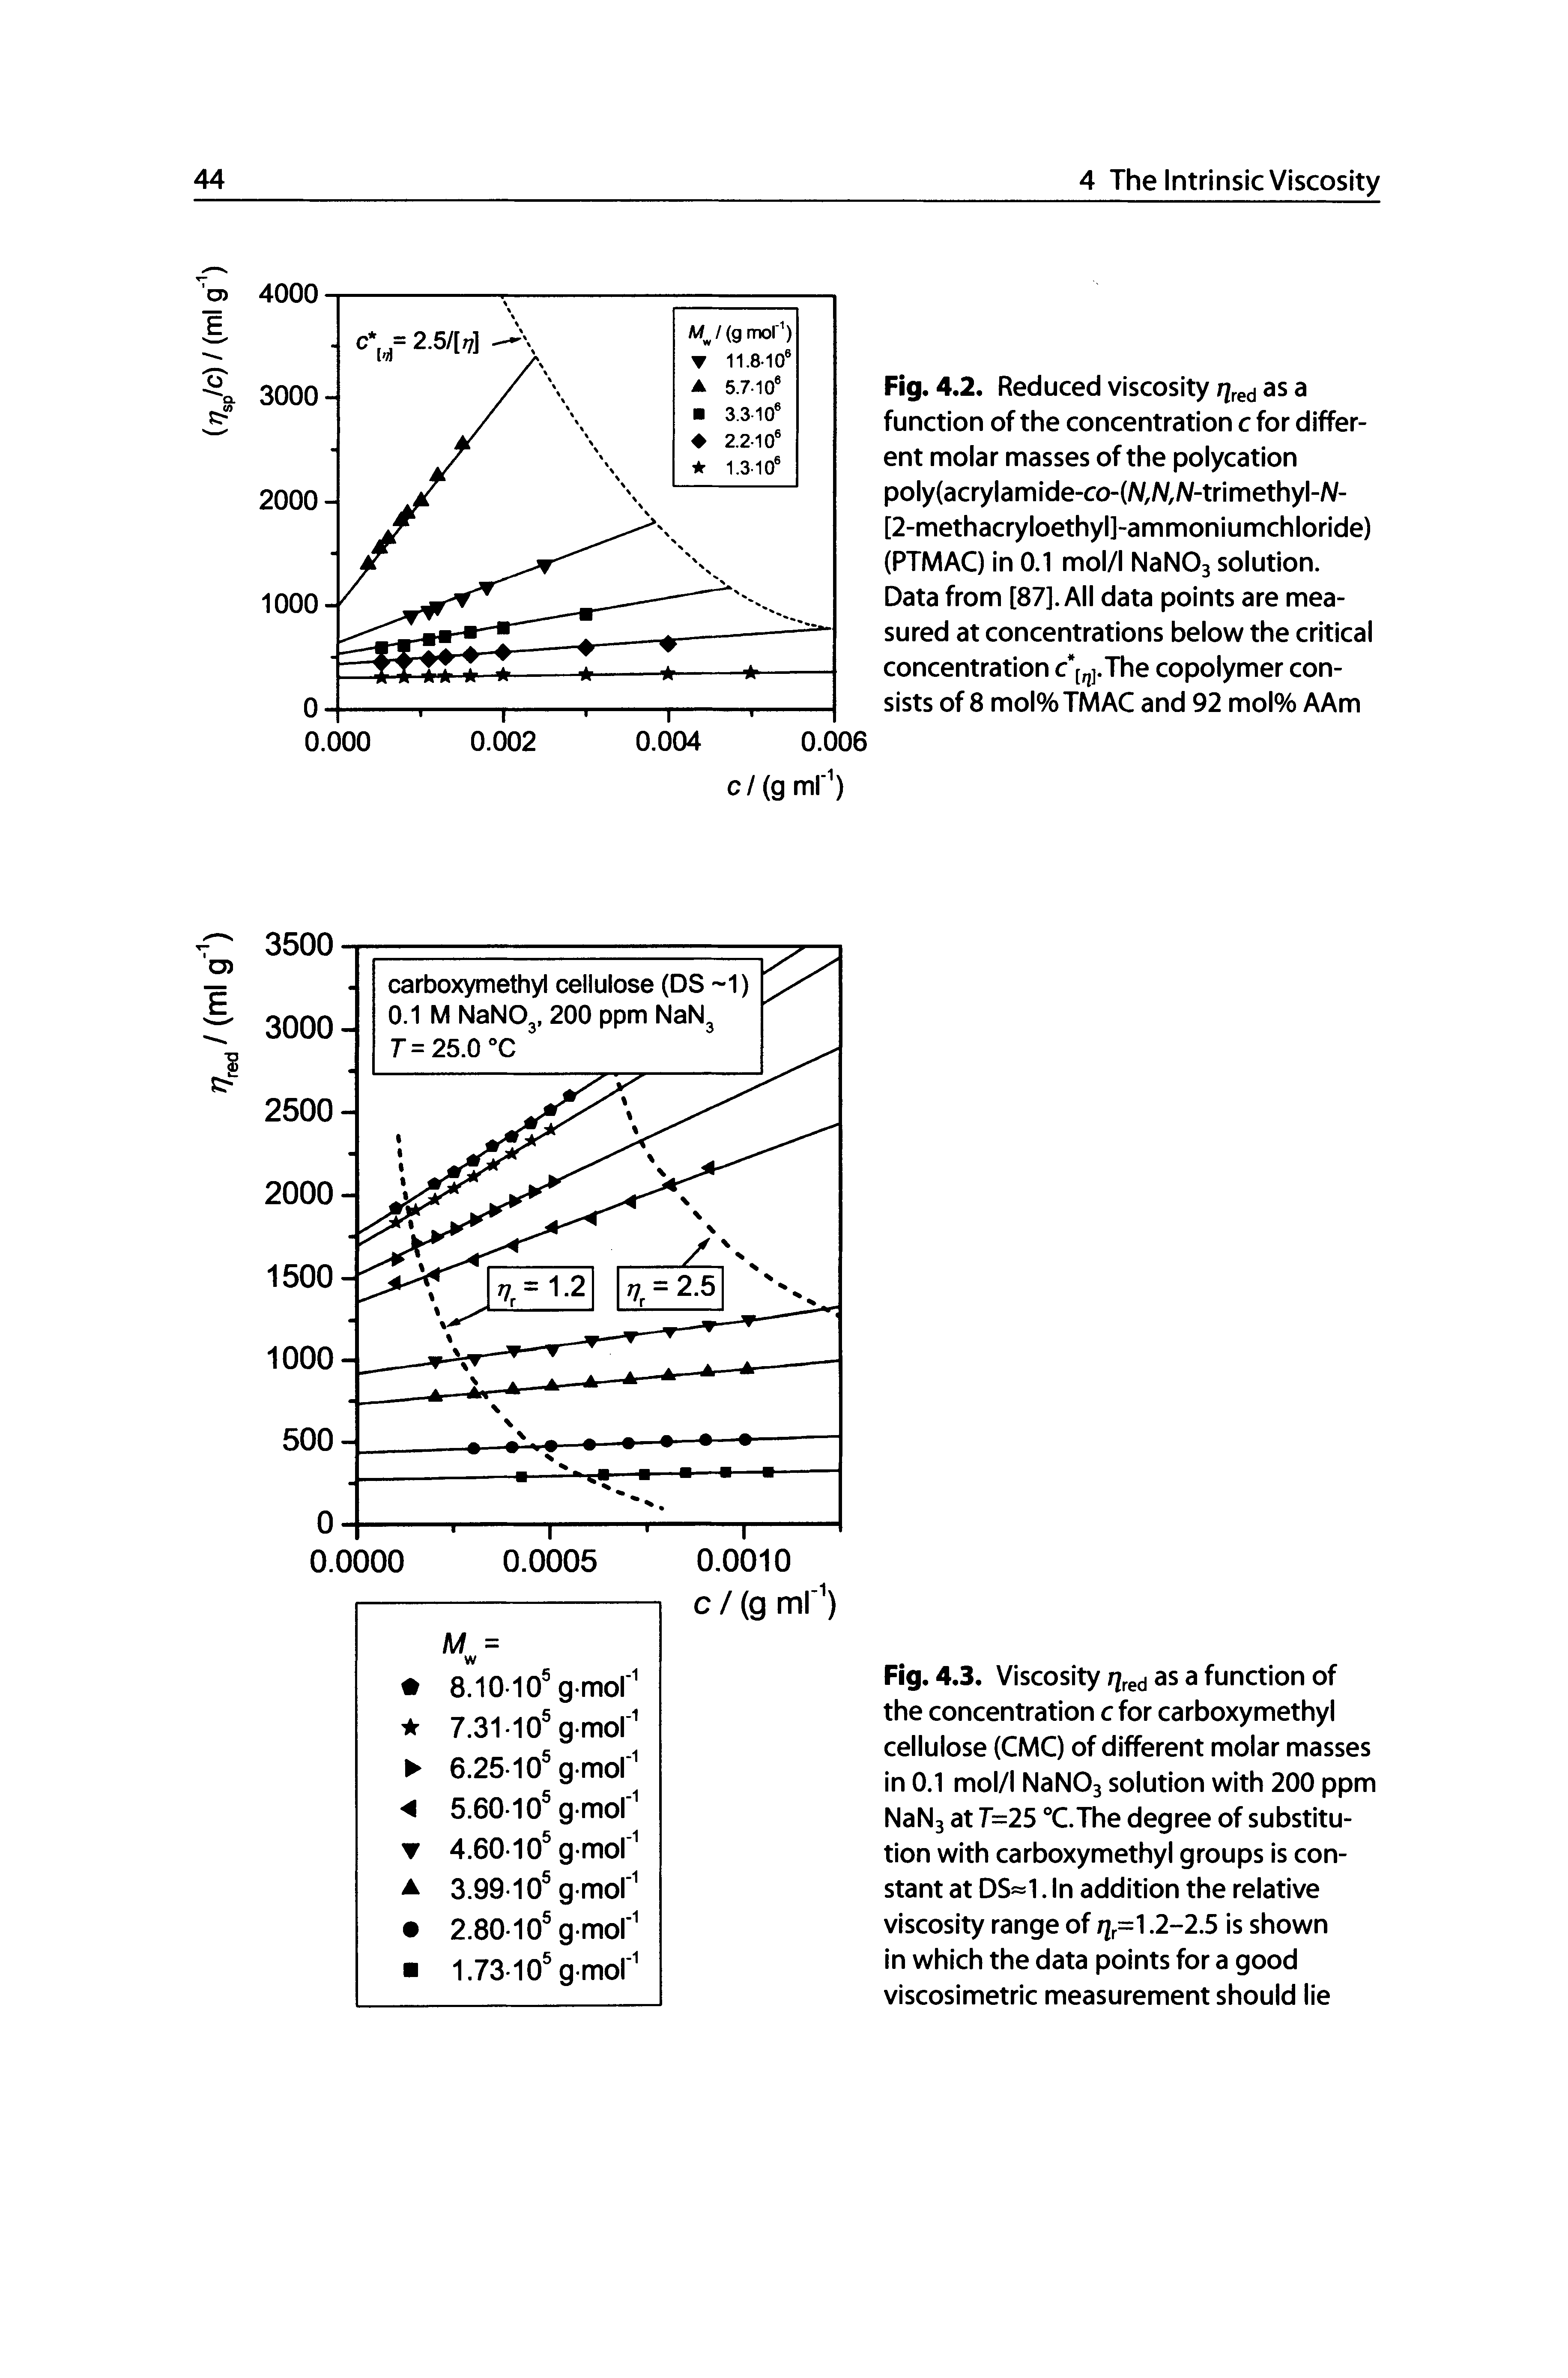 Fig. 4.3. Viscosity q ed a function of the concentration c for carboxymethyl cellulose (CMC) of different molar masses in 0.1 mol/l NaNOj solution with 200 ppm NaNj at 7=25 °C.The degree of substitution with carboxymethyl groups is constant at DS. In addition the relative viscosity range of qr=. 2-2.5 is shown In which the data points for a good viscosimetric measurement should lie...